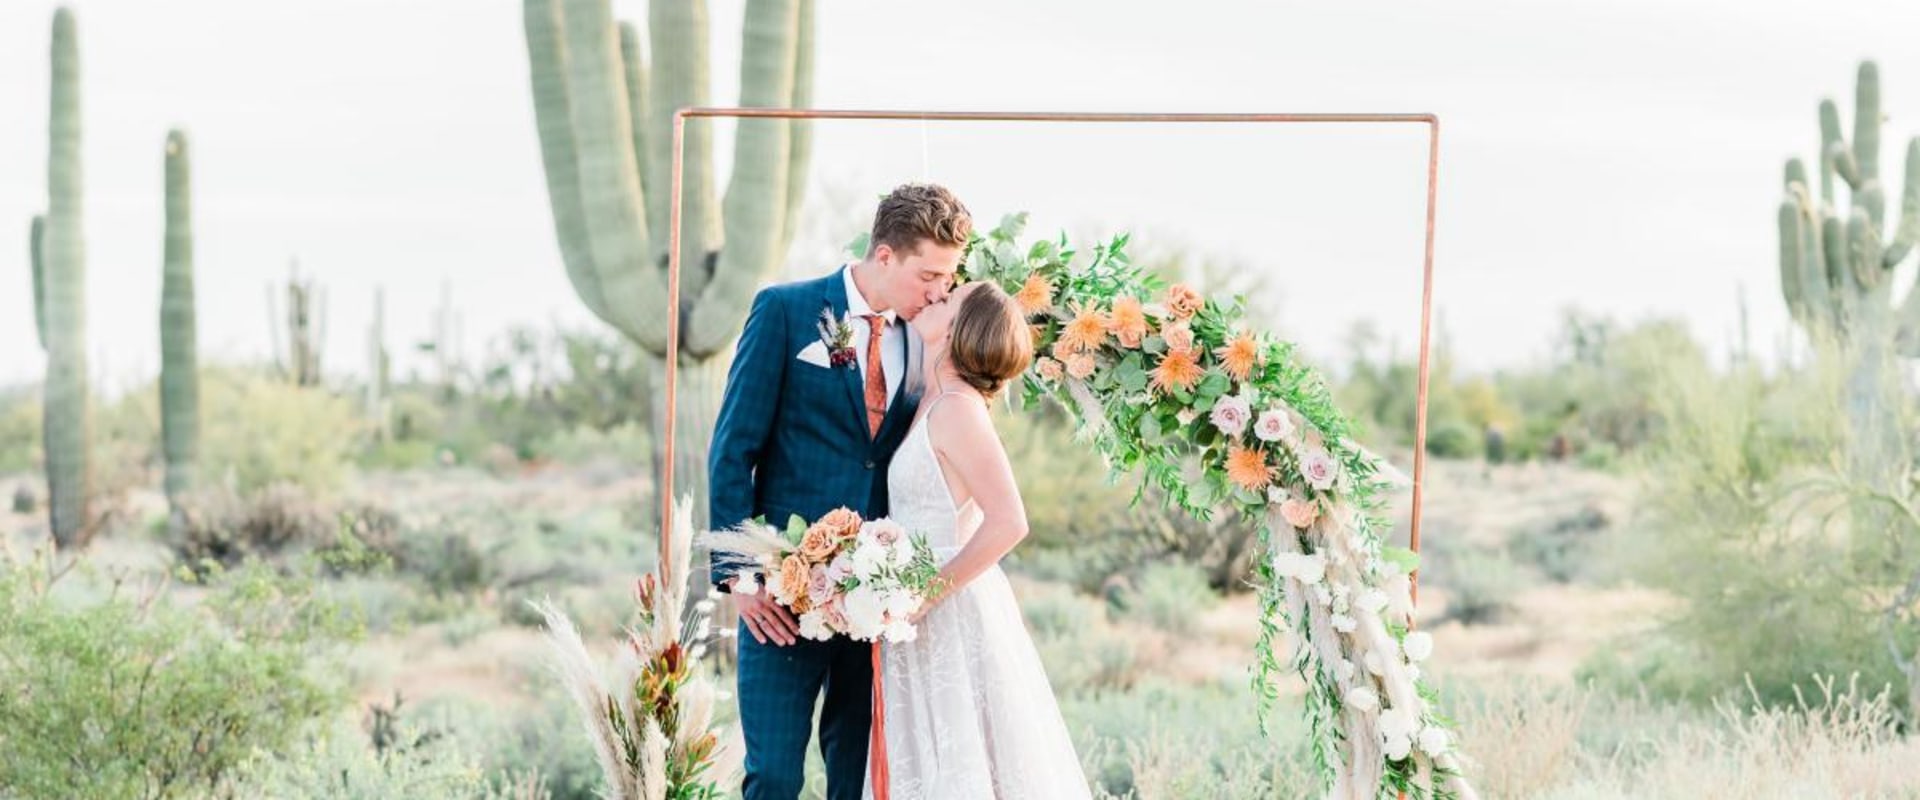 Intimate Ceremonies for Two: A Guide to Elopement and Outdoor Wedding Packages in Arizona